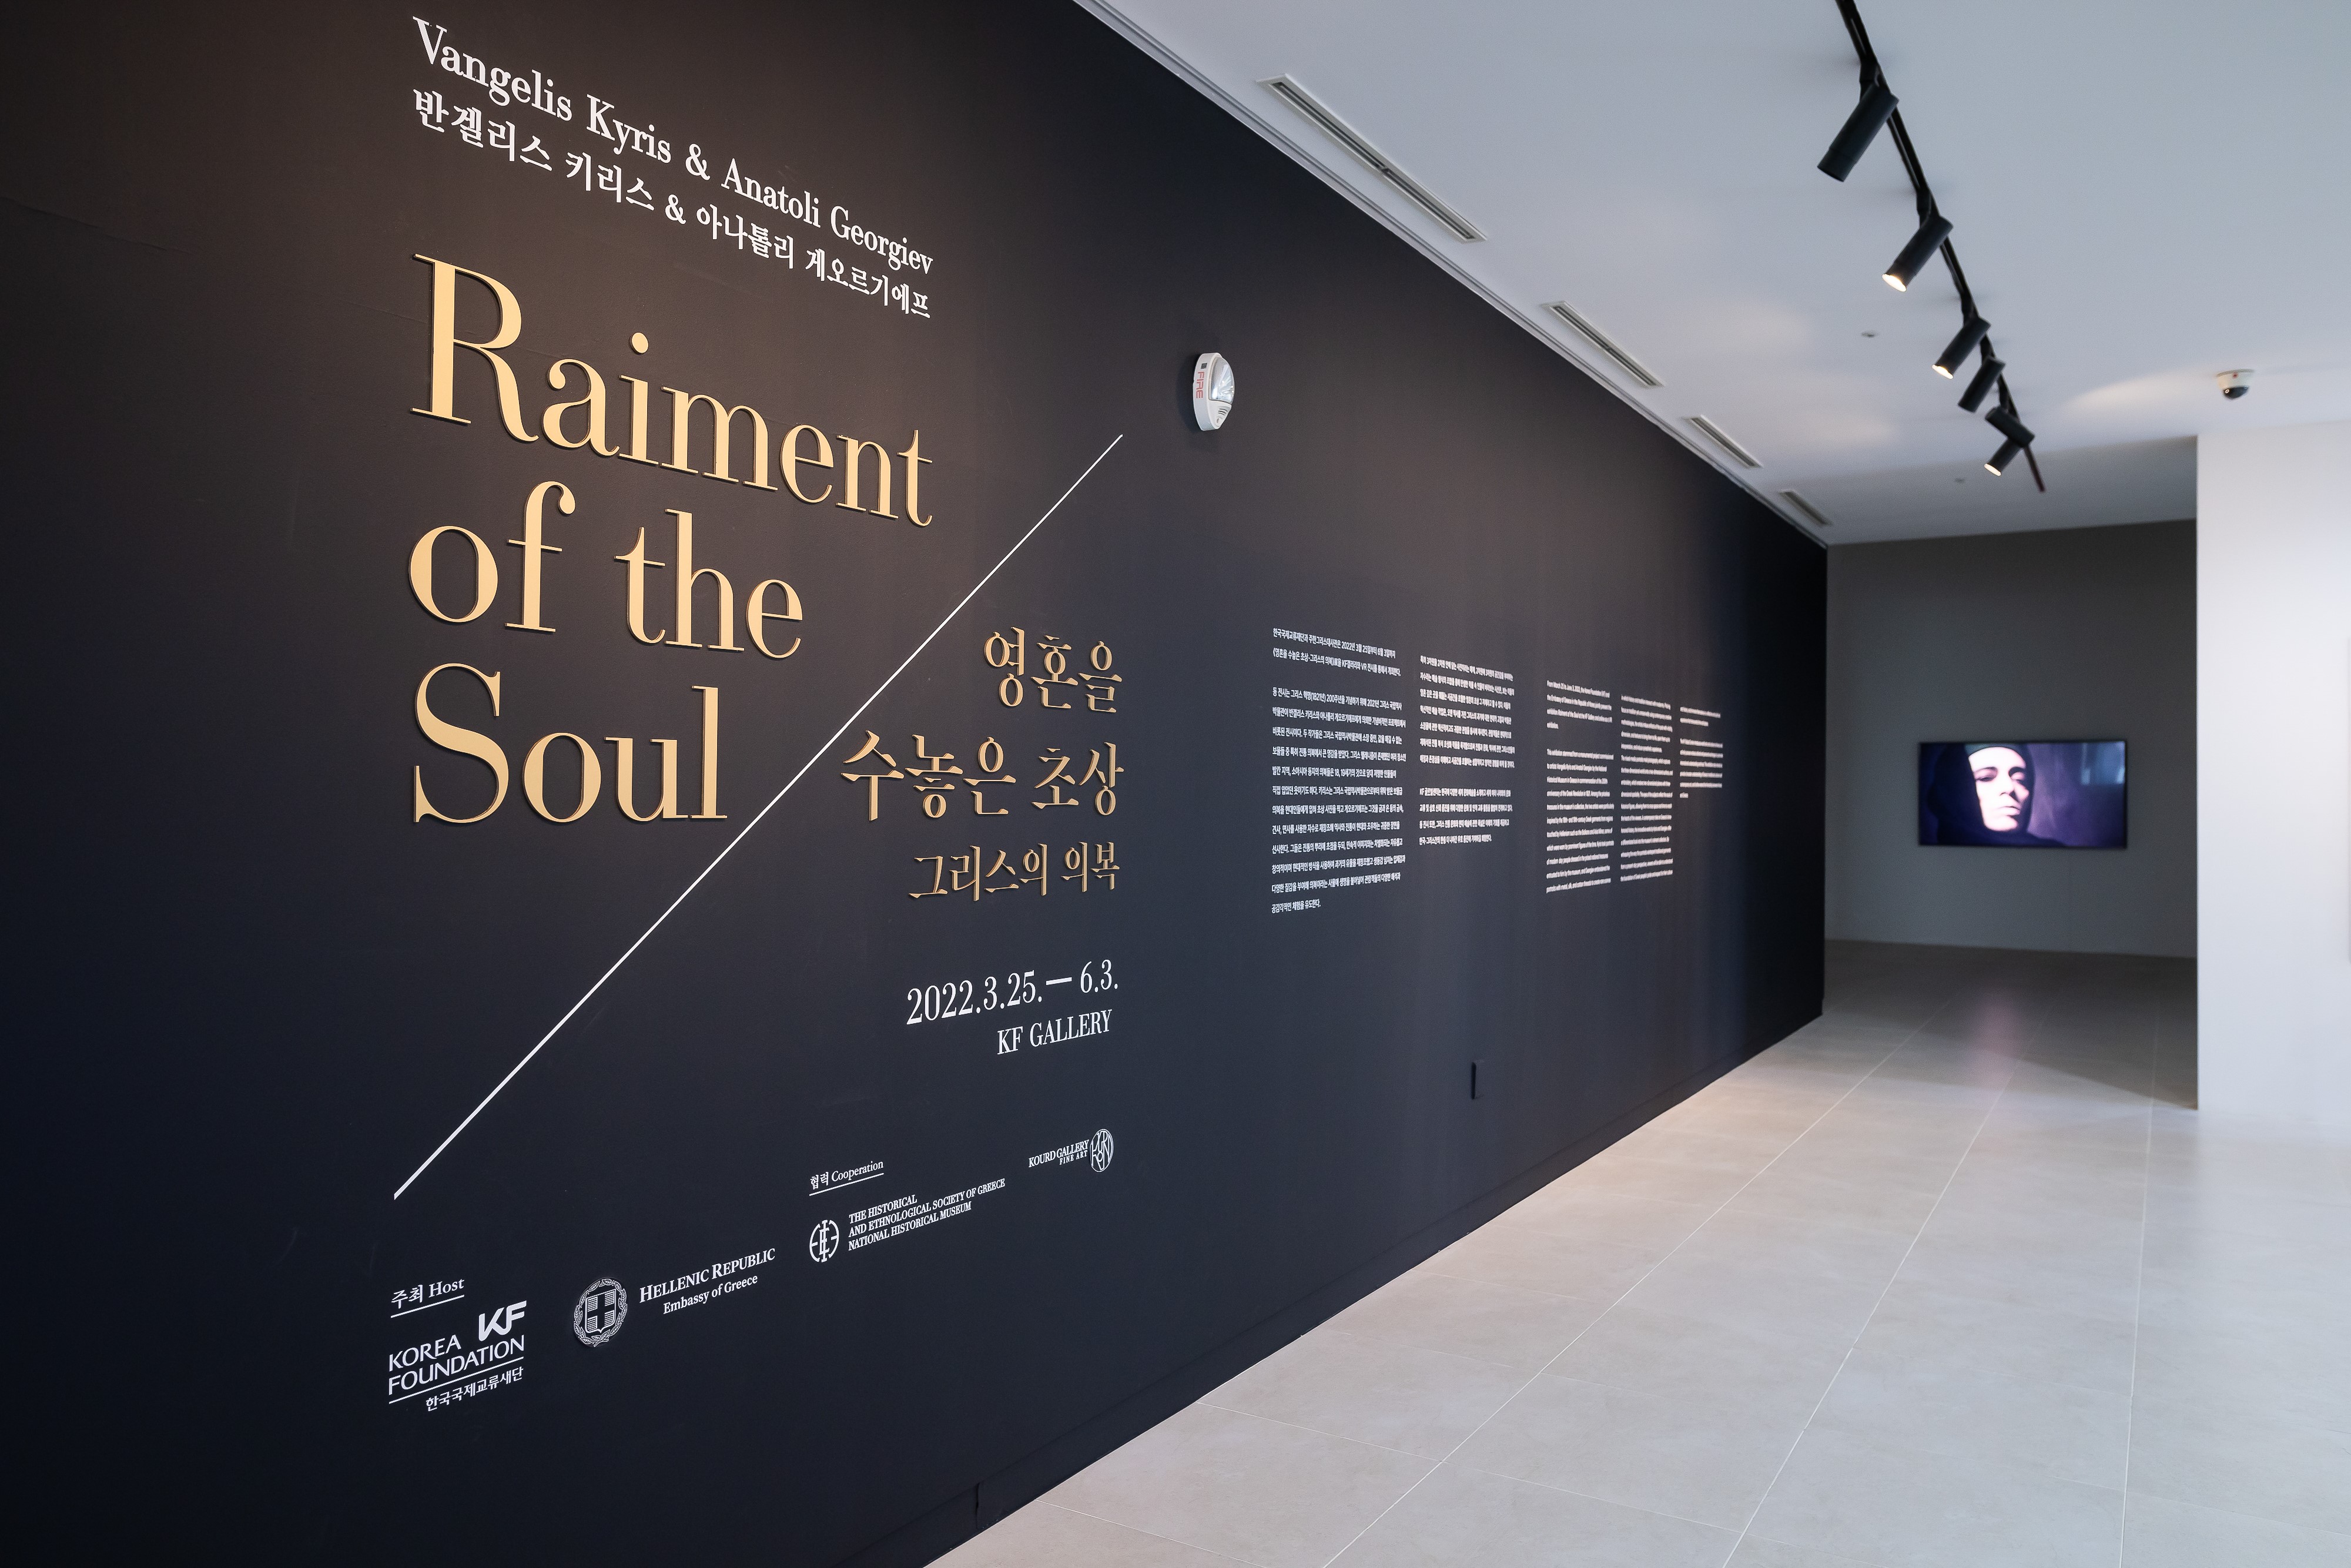 "Raiment of the Soul" Exhibition at KF Gallery in Seoul